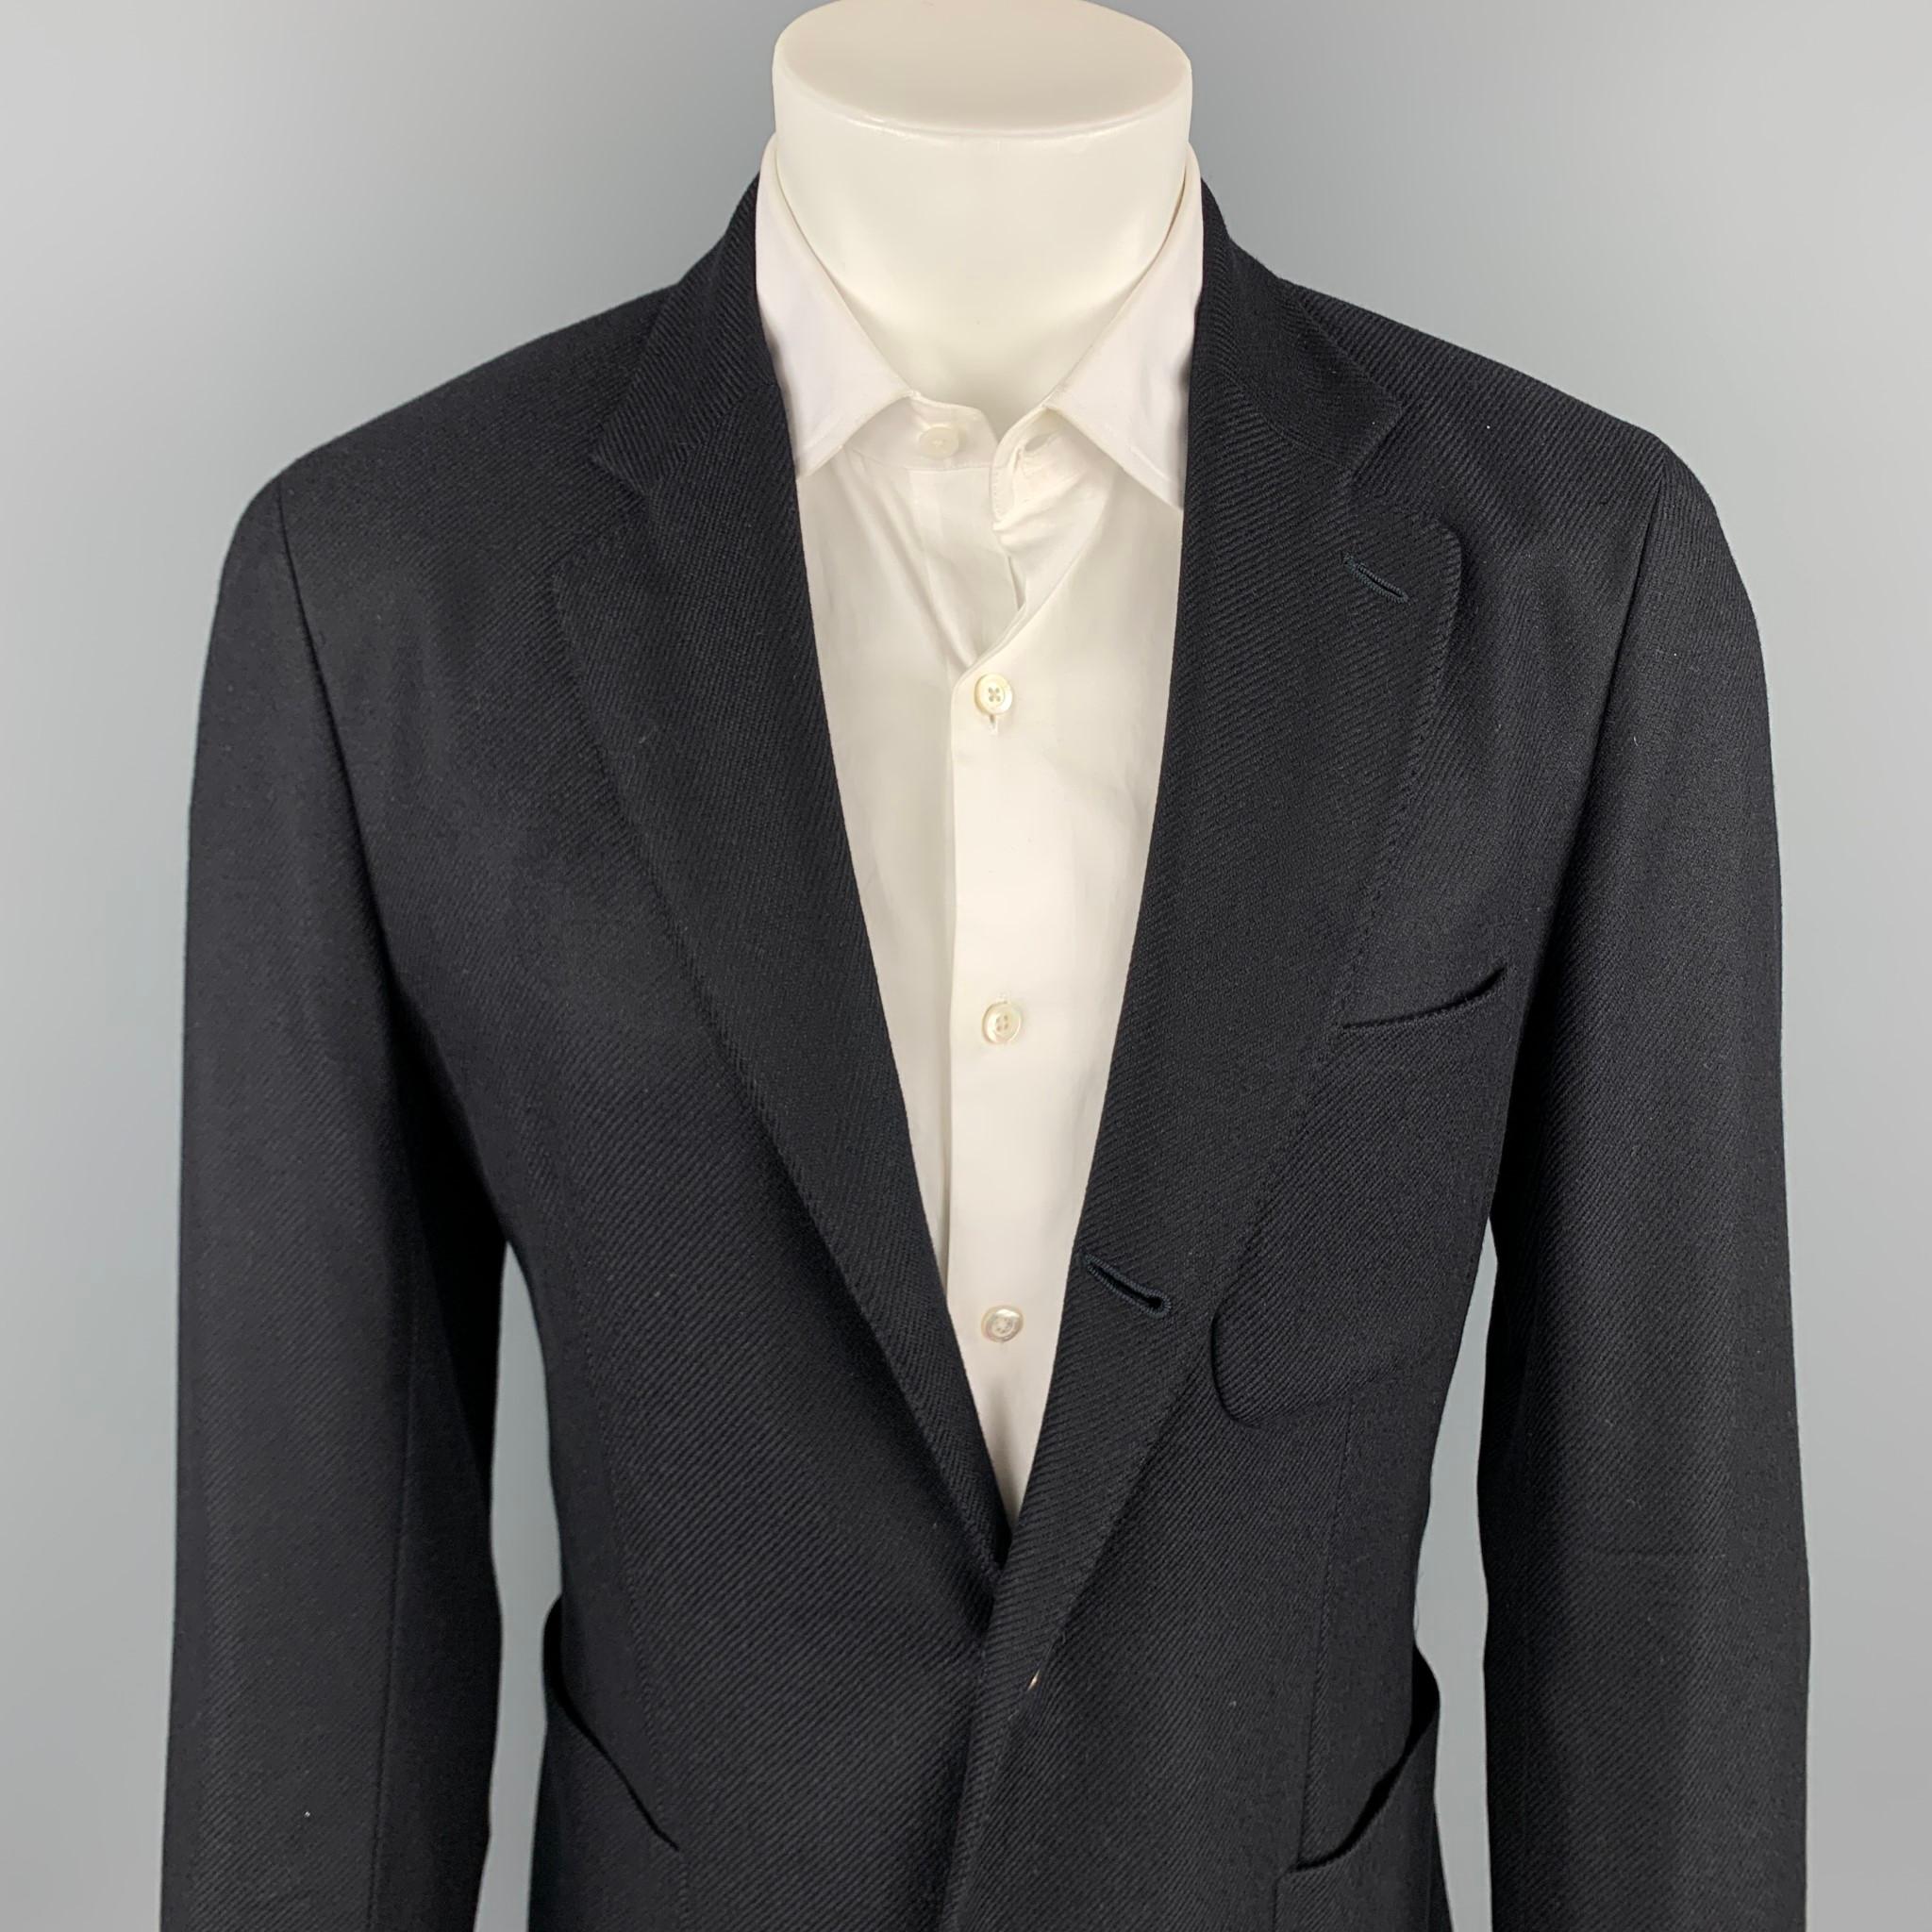 LORO PIANA sport coat comes in a black cashmere with a suede trim featuring a notch lapel, patch pockets, and a three button closure. Made in Italy.

Excellent Pre-Owned Condition.
Marked: IT 48

Measurements:

Shoulder: 18.5 in.
Chest: 38